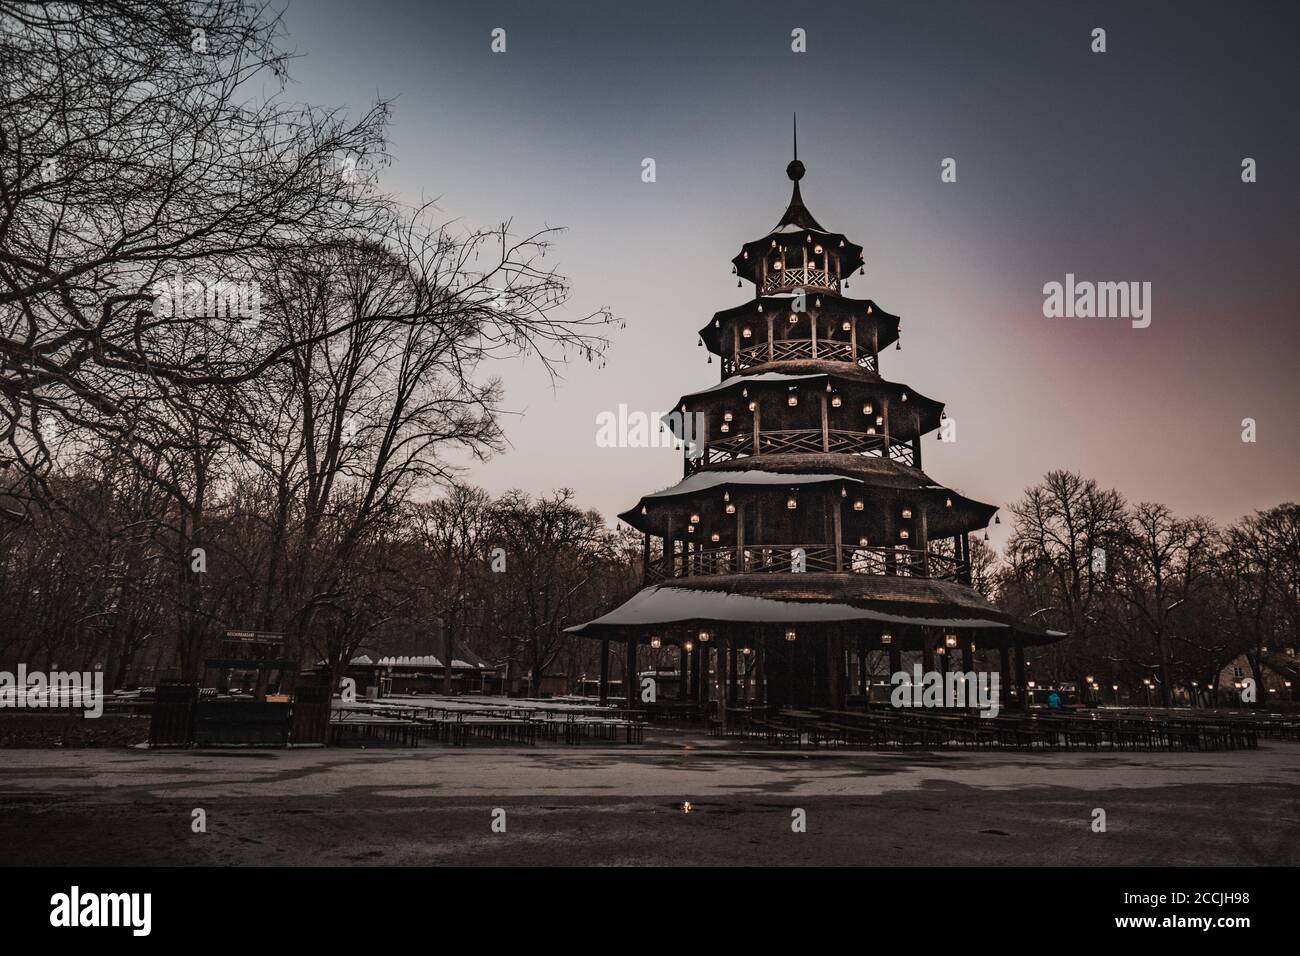 The famous wooden Chinese Tower (Chinesischen Turm) and beer Garden with its beautiful blooming horse chestnut trees in Munich Bavaria Germany. Stock Photo